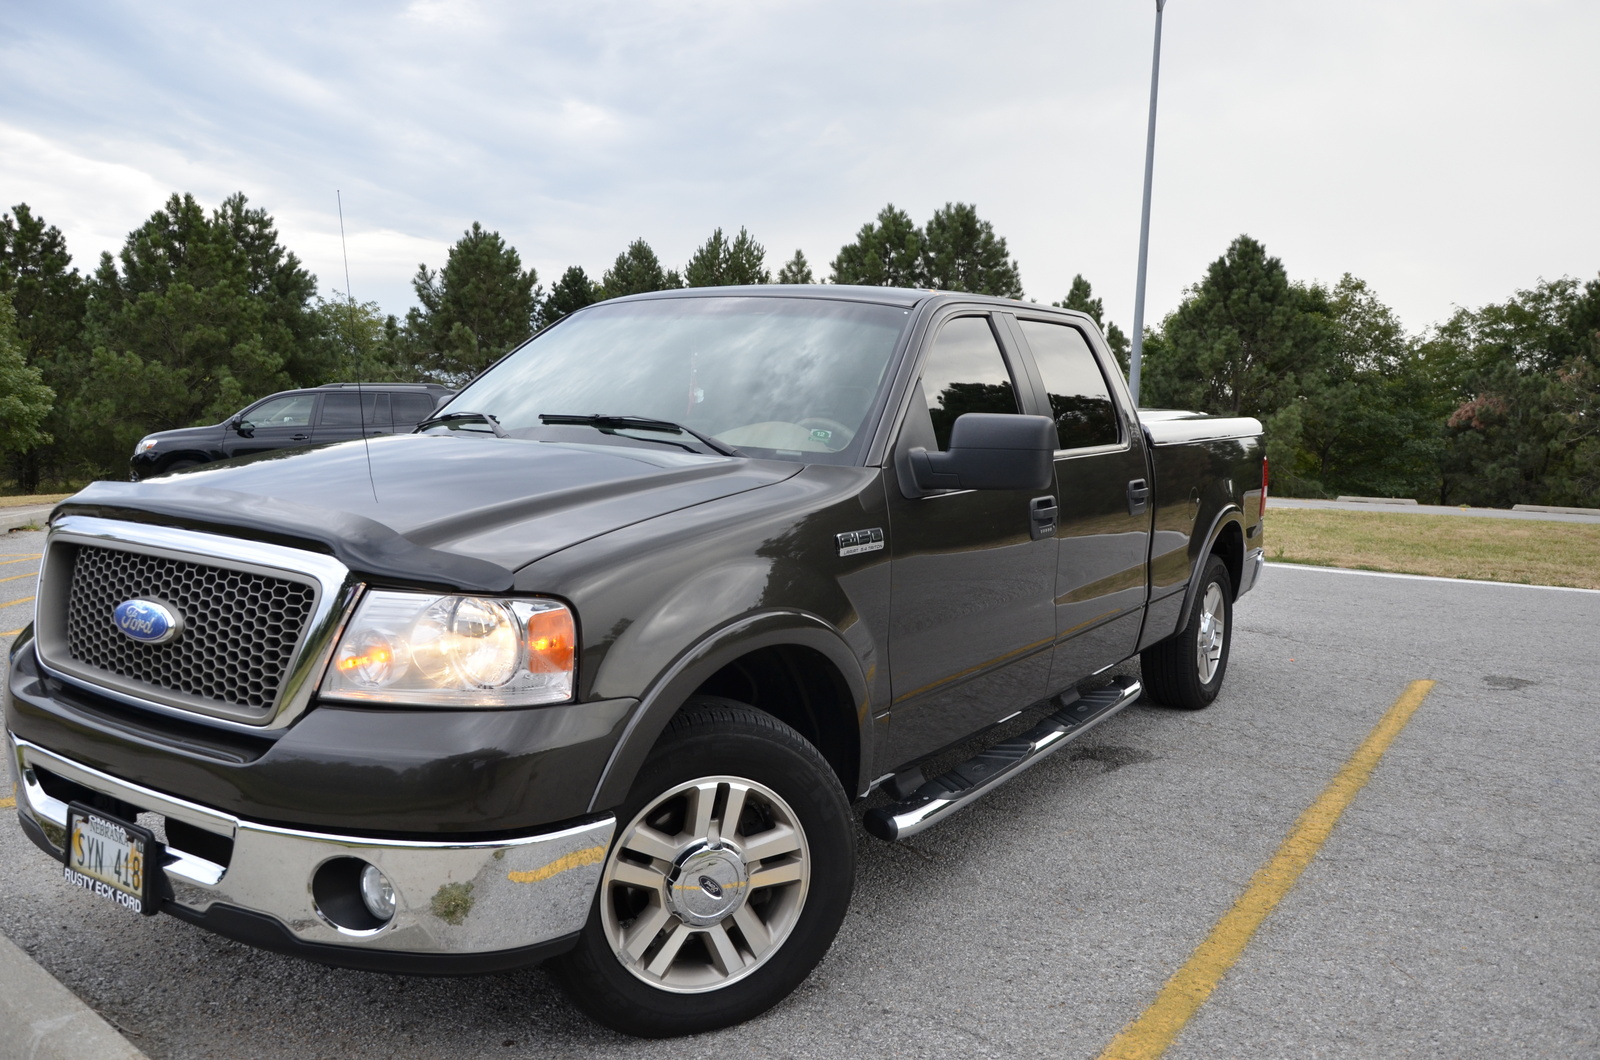 2006 Ford f150 supercrew lariat review #2